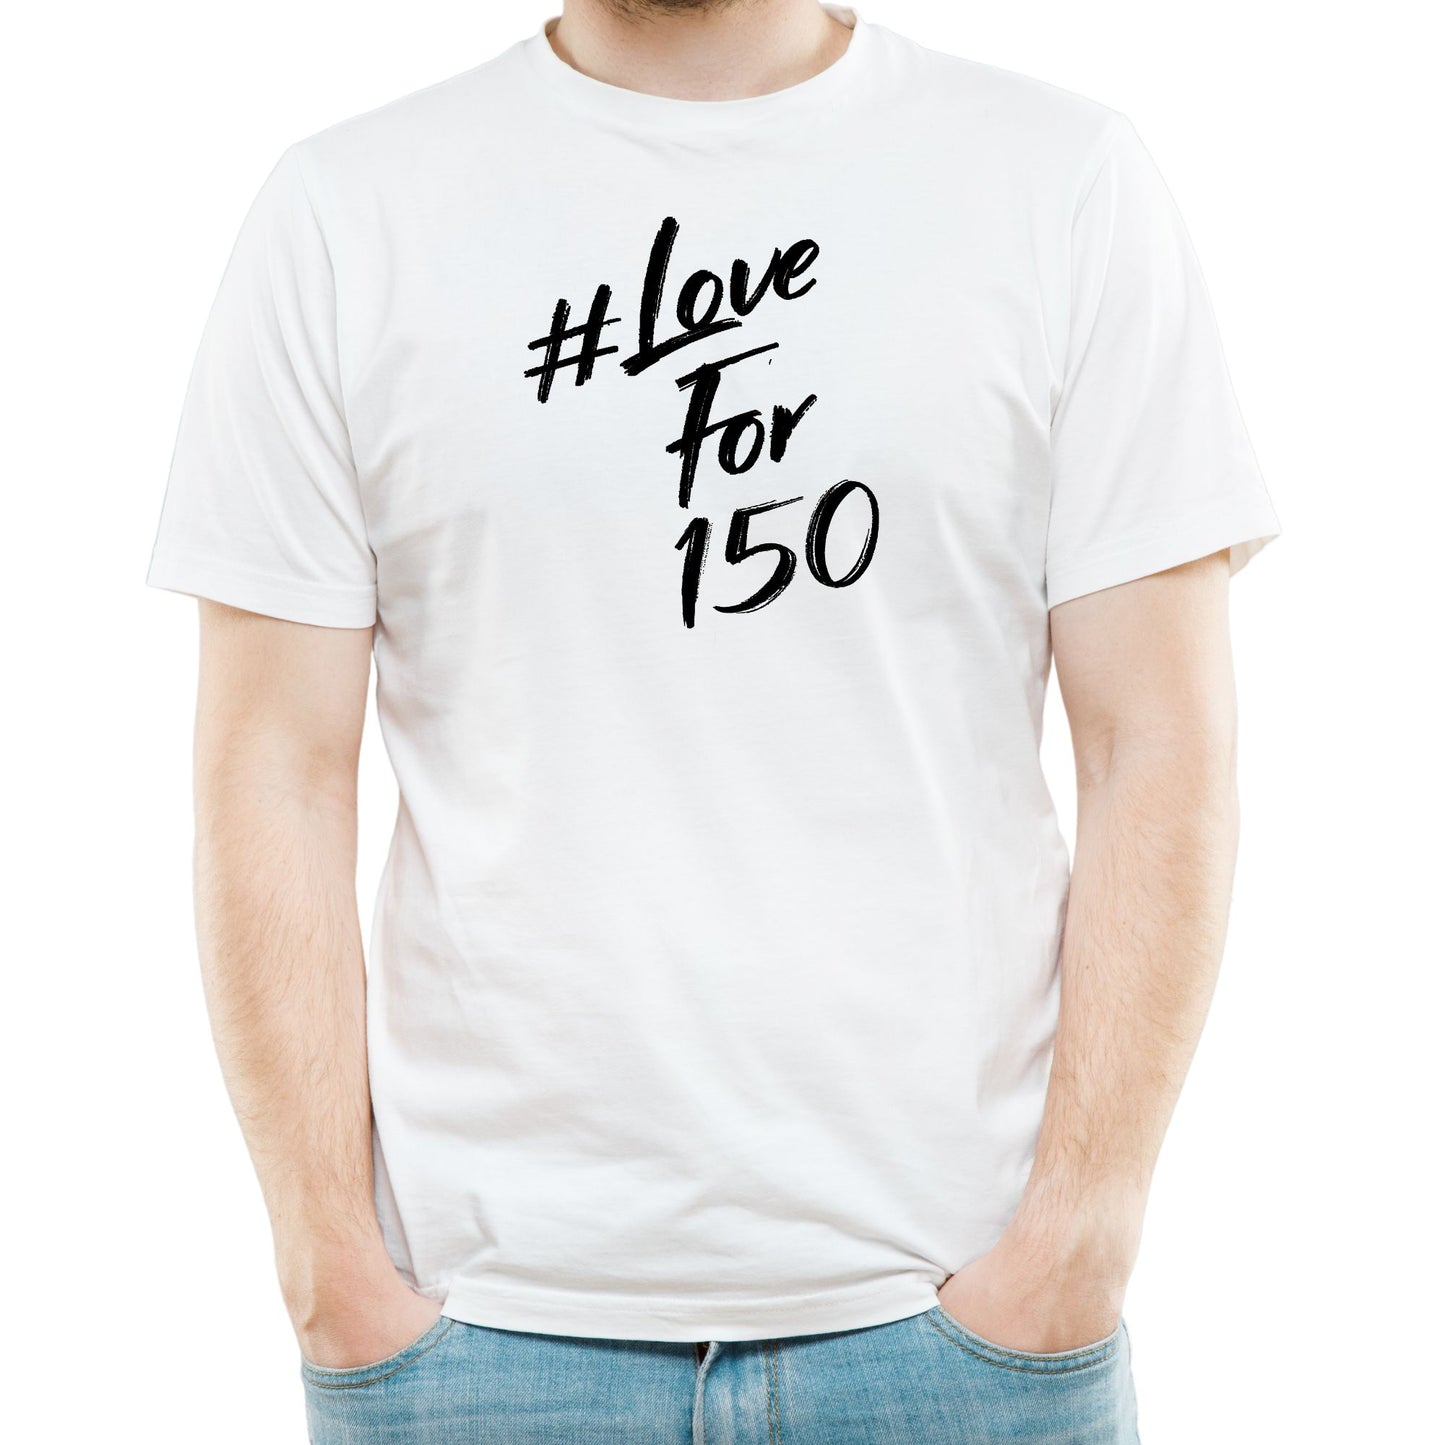 TLC Love For 150 Shirts